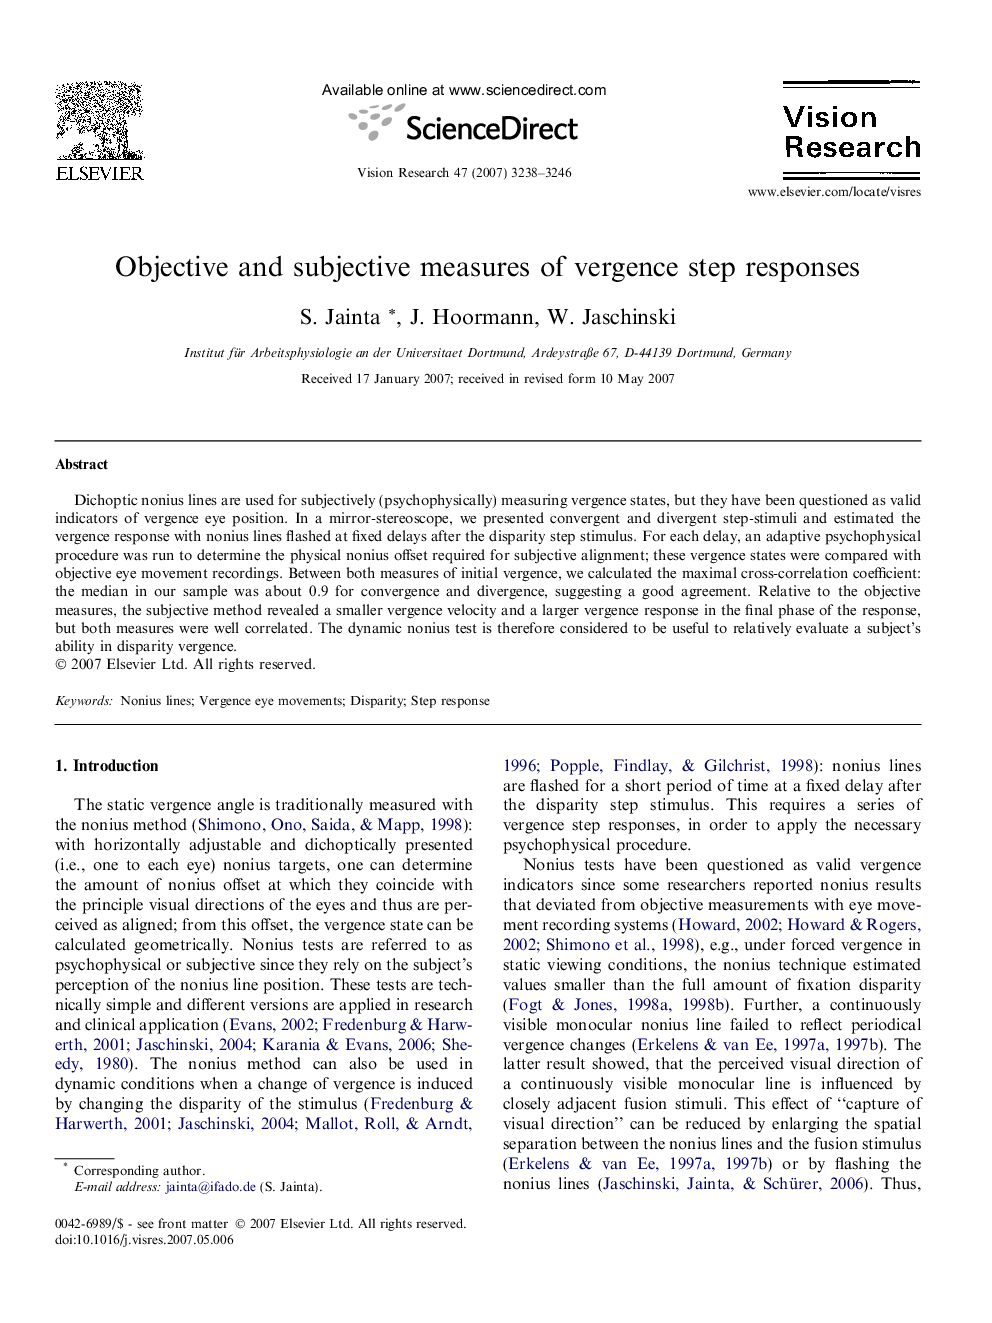 Objective and subjective measures of vergence step responses